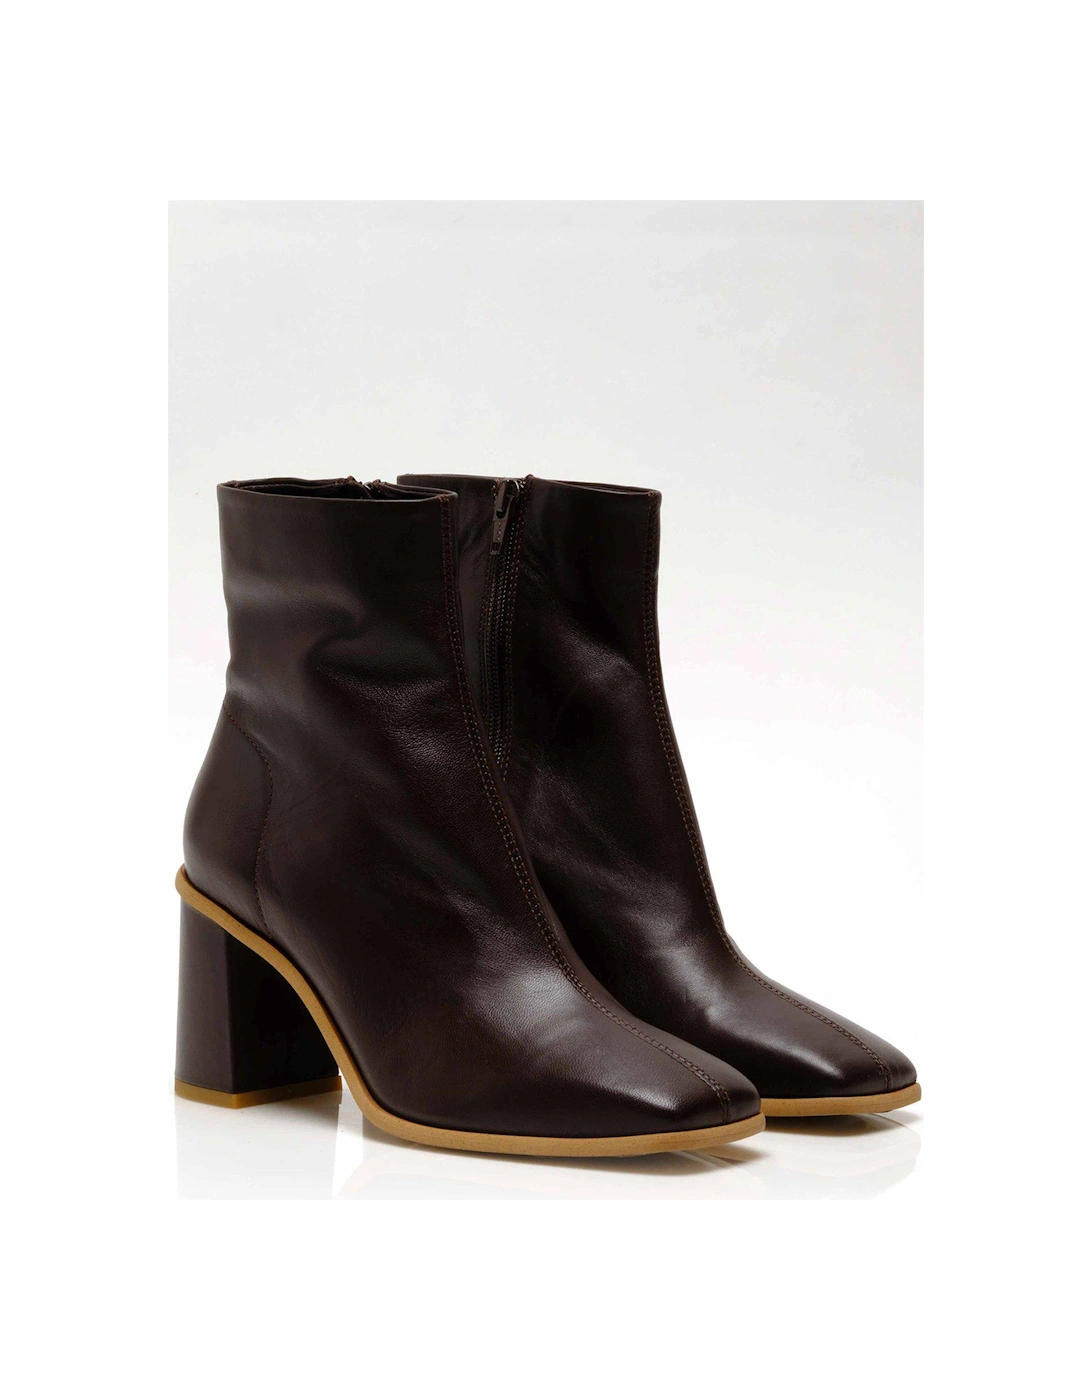 Sienna Ankle Boot - Hot Fudge